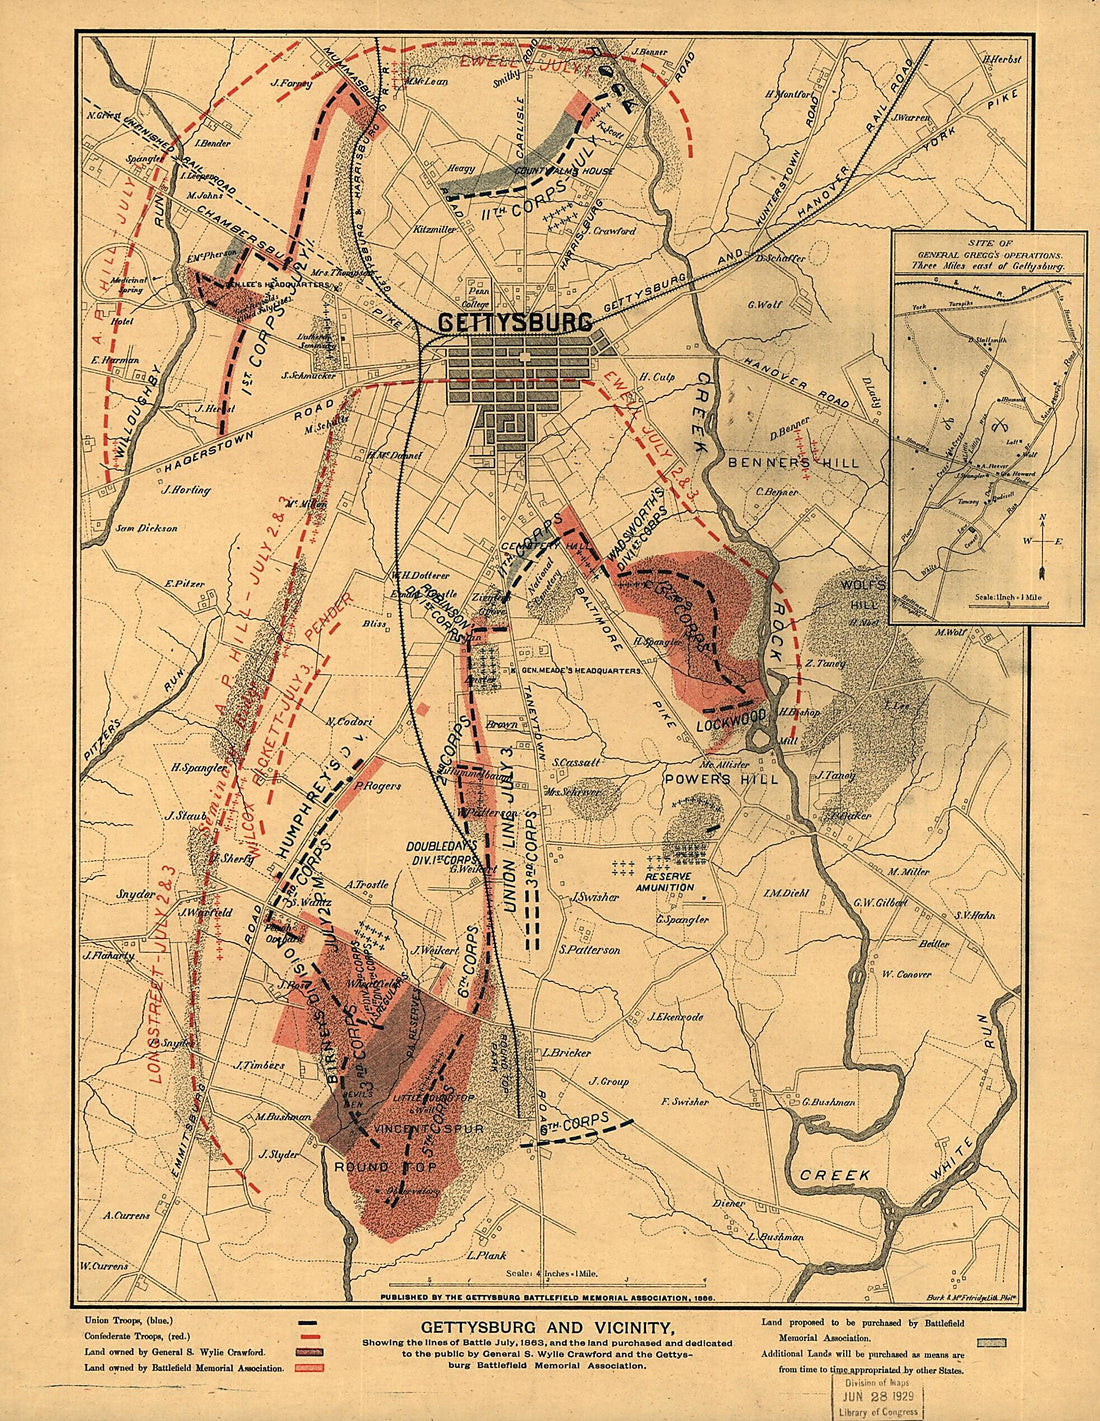 This old map of Gettysburg and Vicinity, Showing the Lines of Battle July, from 1863, and the Land Purchased and Dedicated to the Public by General S. Wylie Crawford and the Gettysburg Battlefield Memorial Association was created by  Gettysburg Battlefie